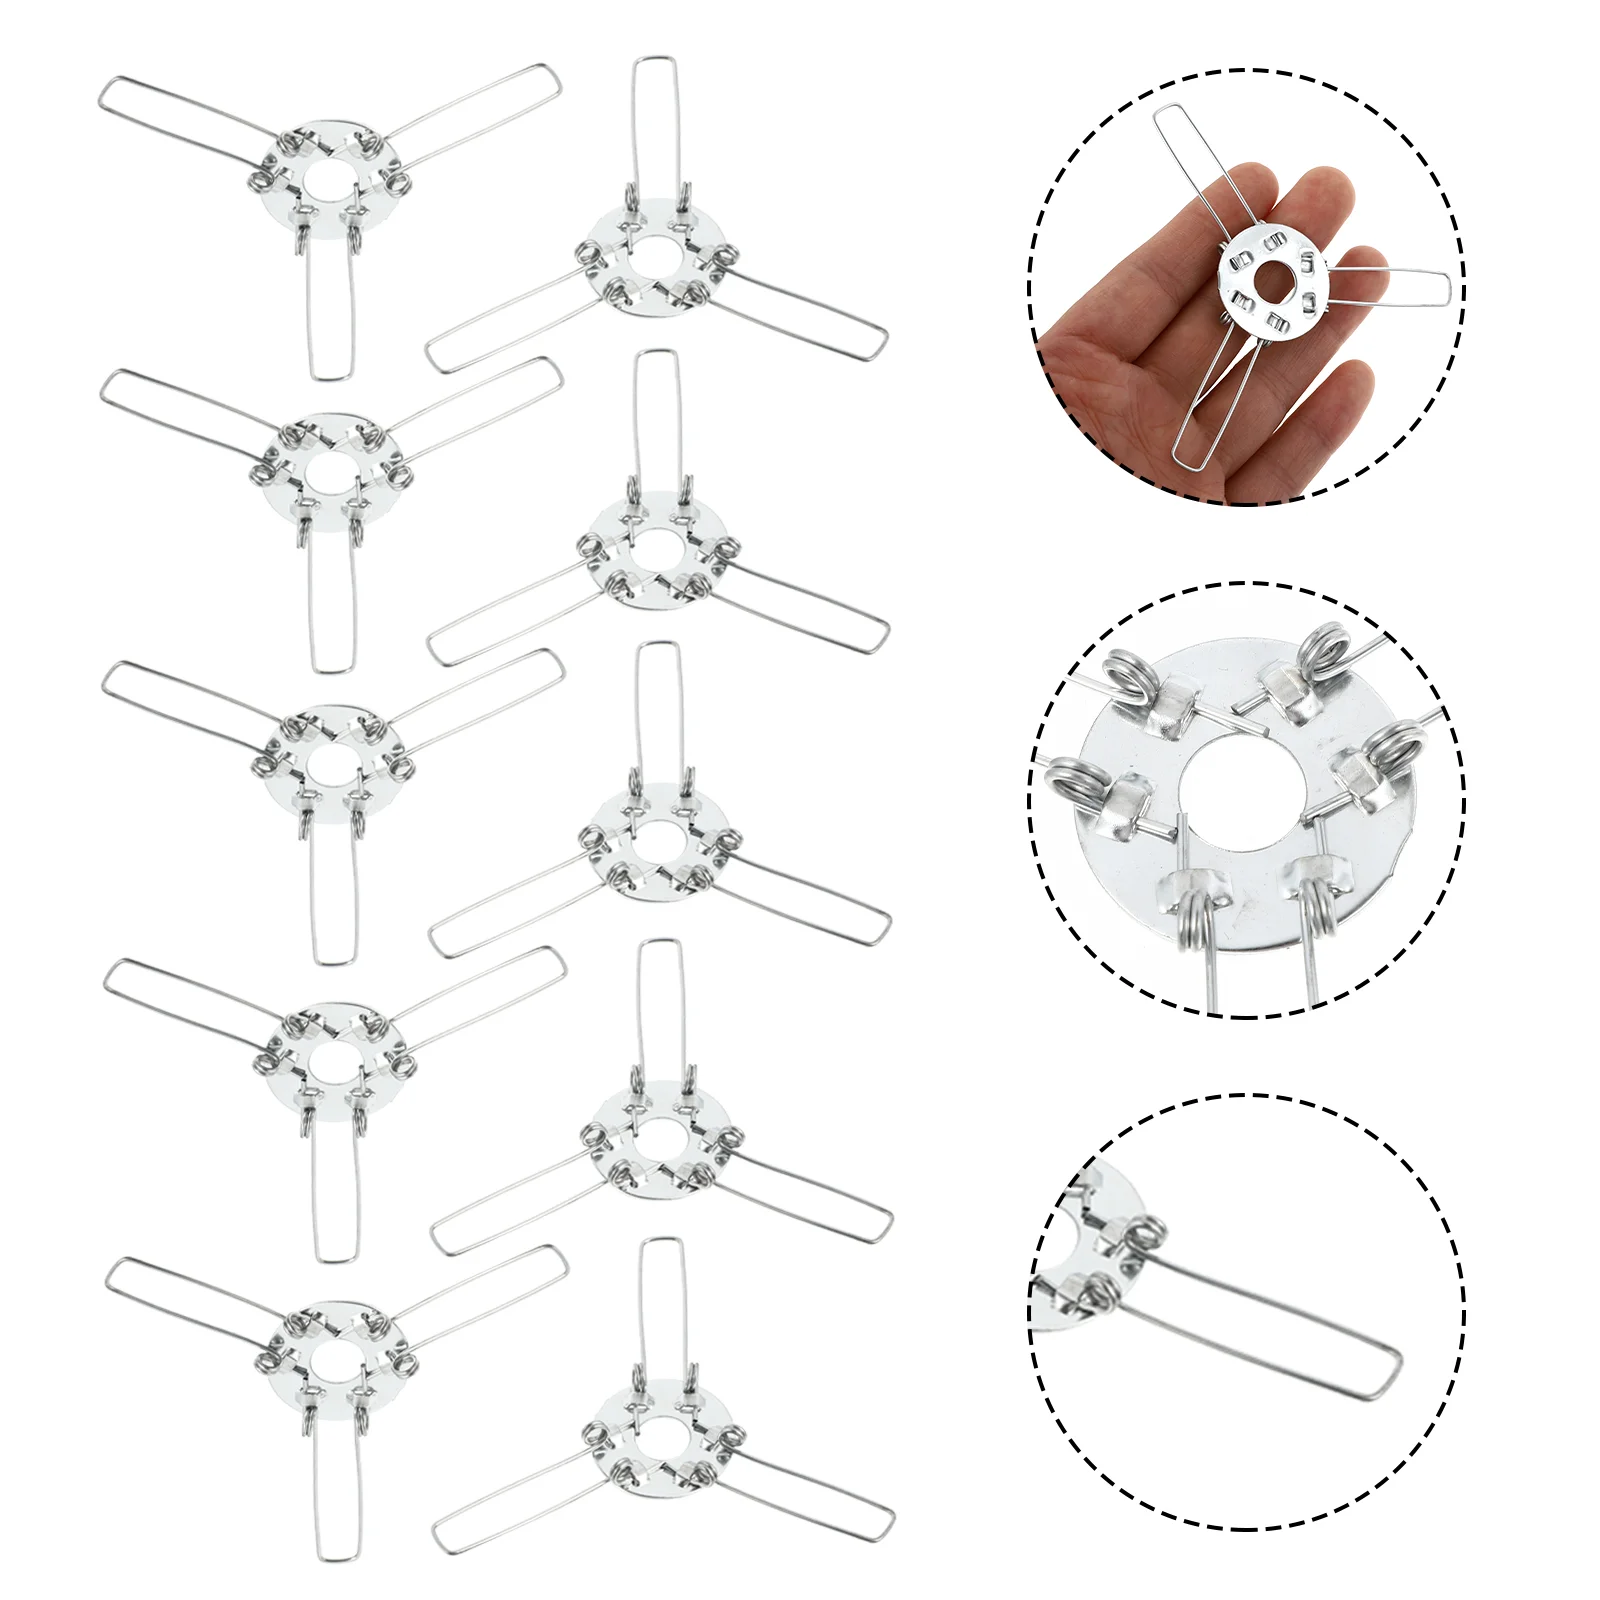 

20 Pcs Trident Light Holder Spring Lampshade Buckles LED Cover Bulb Finials Lampshades Levellers Head Support Clips Attaching